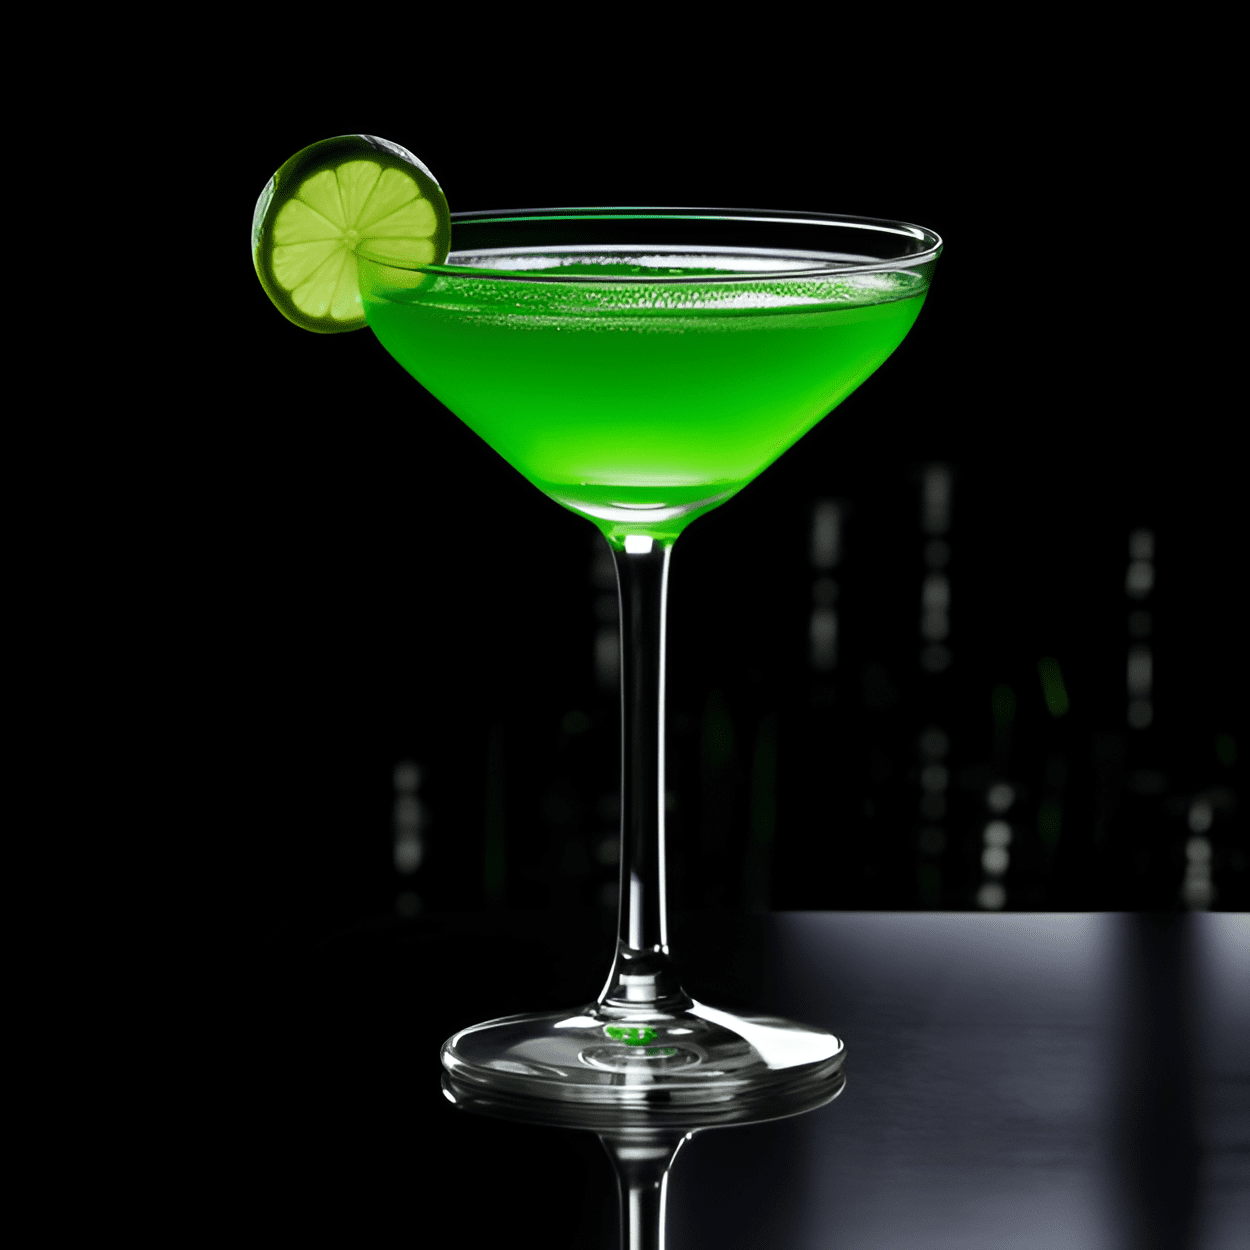 Kermit The Frog Piss Cocktail Recipe - The Kermit The Frog Piss is a delightful blend of sweet and sour. The Midori melon liqueur gives it a sweet, fruity flavor, while the sour mix adds a tangy kick. The vodka provides a strong, smooth base, making this cocktail a well-rounded experience.